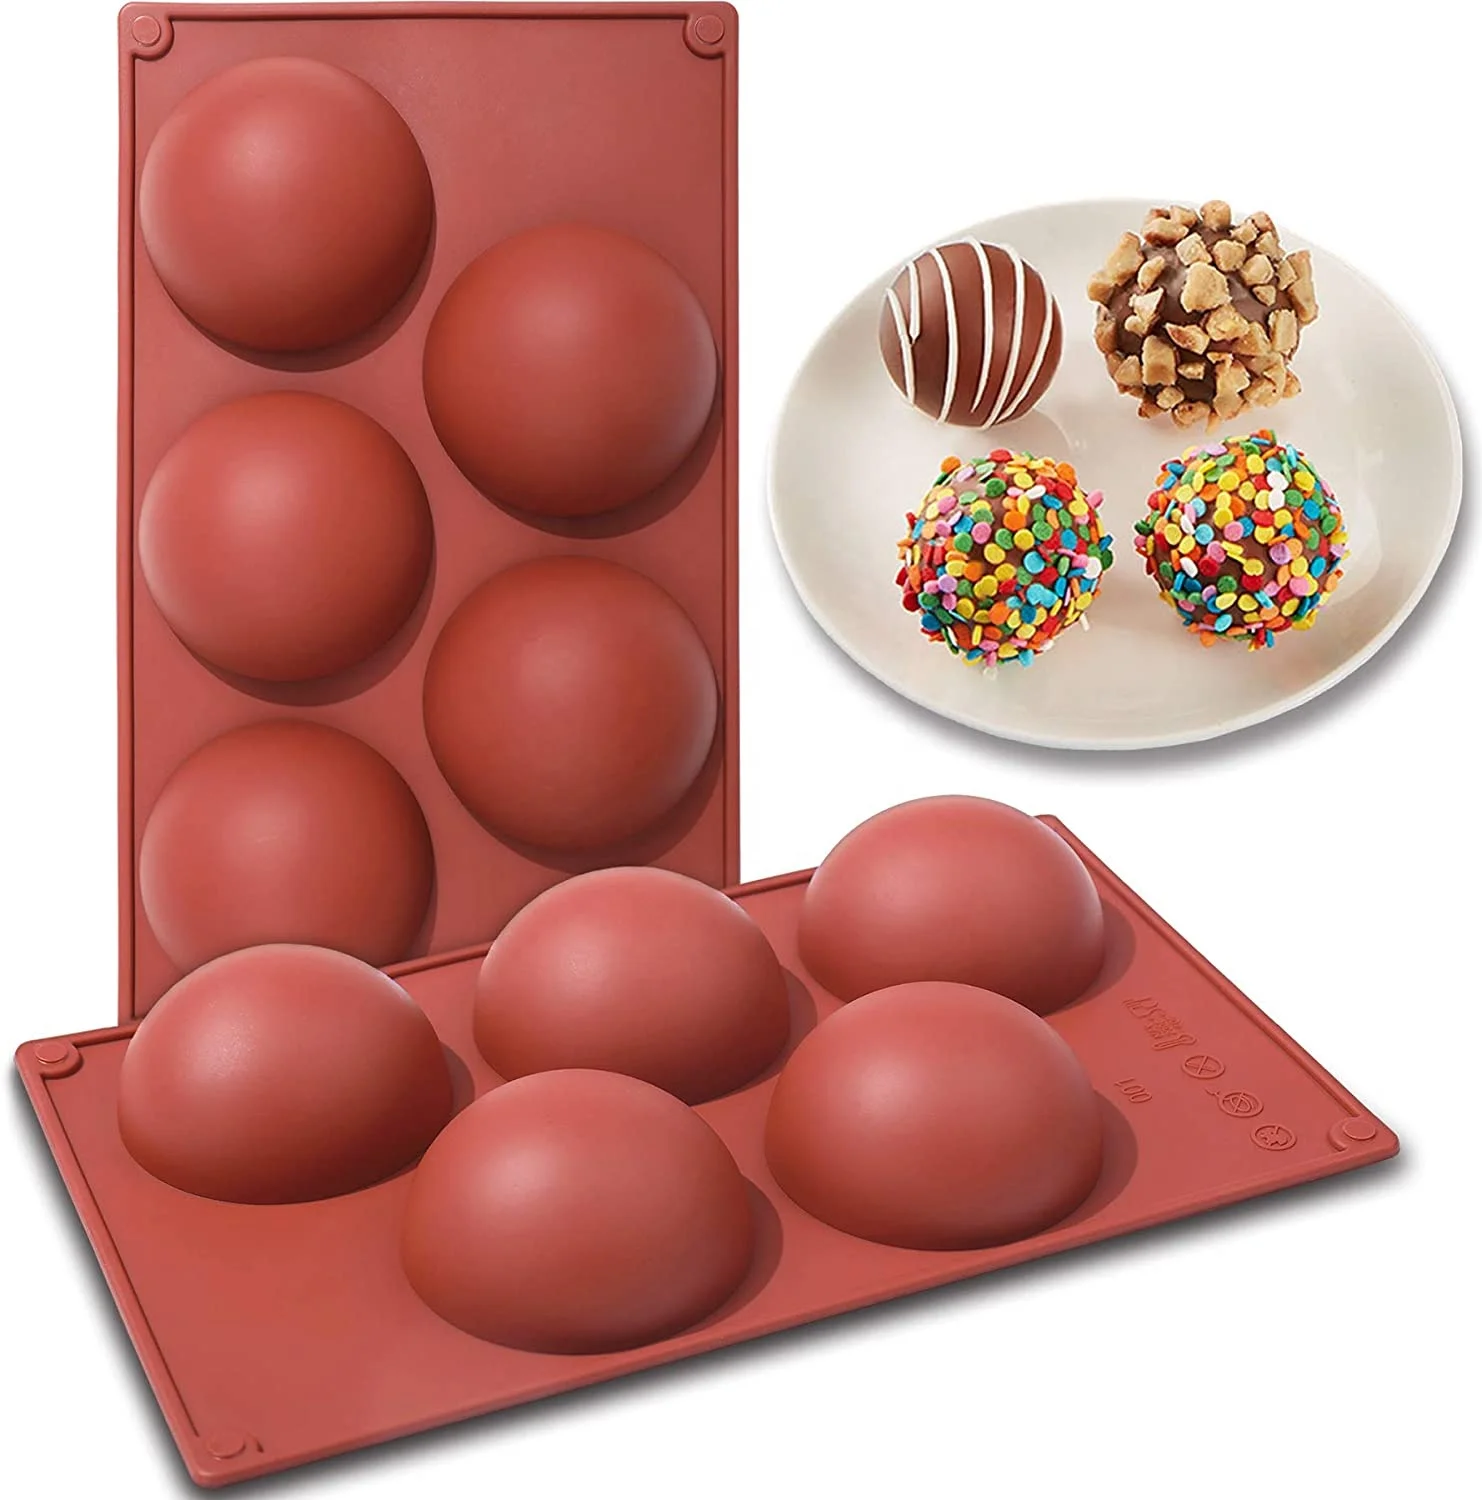 

Extra Large 5-Cavity Hemisphere Mold Semi Half Sphere Diy Silicone Mold For Making Hot Chocolate Bomb